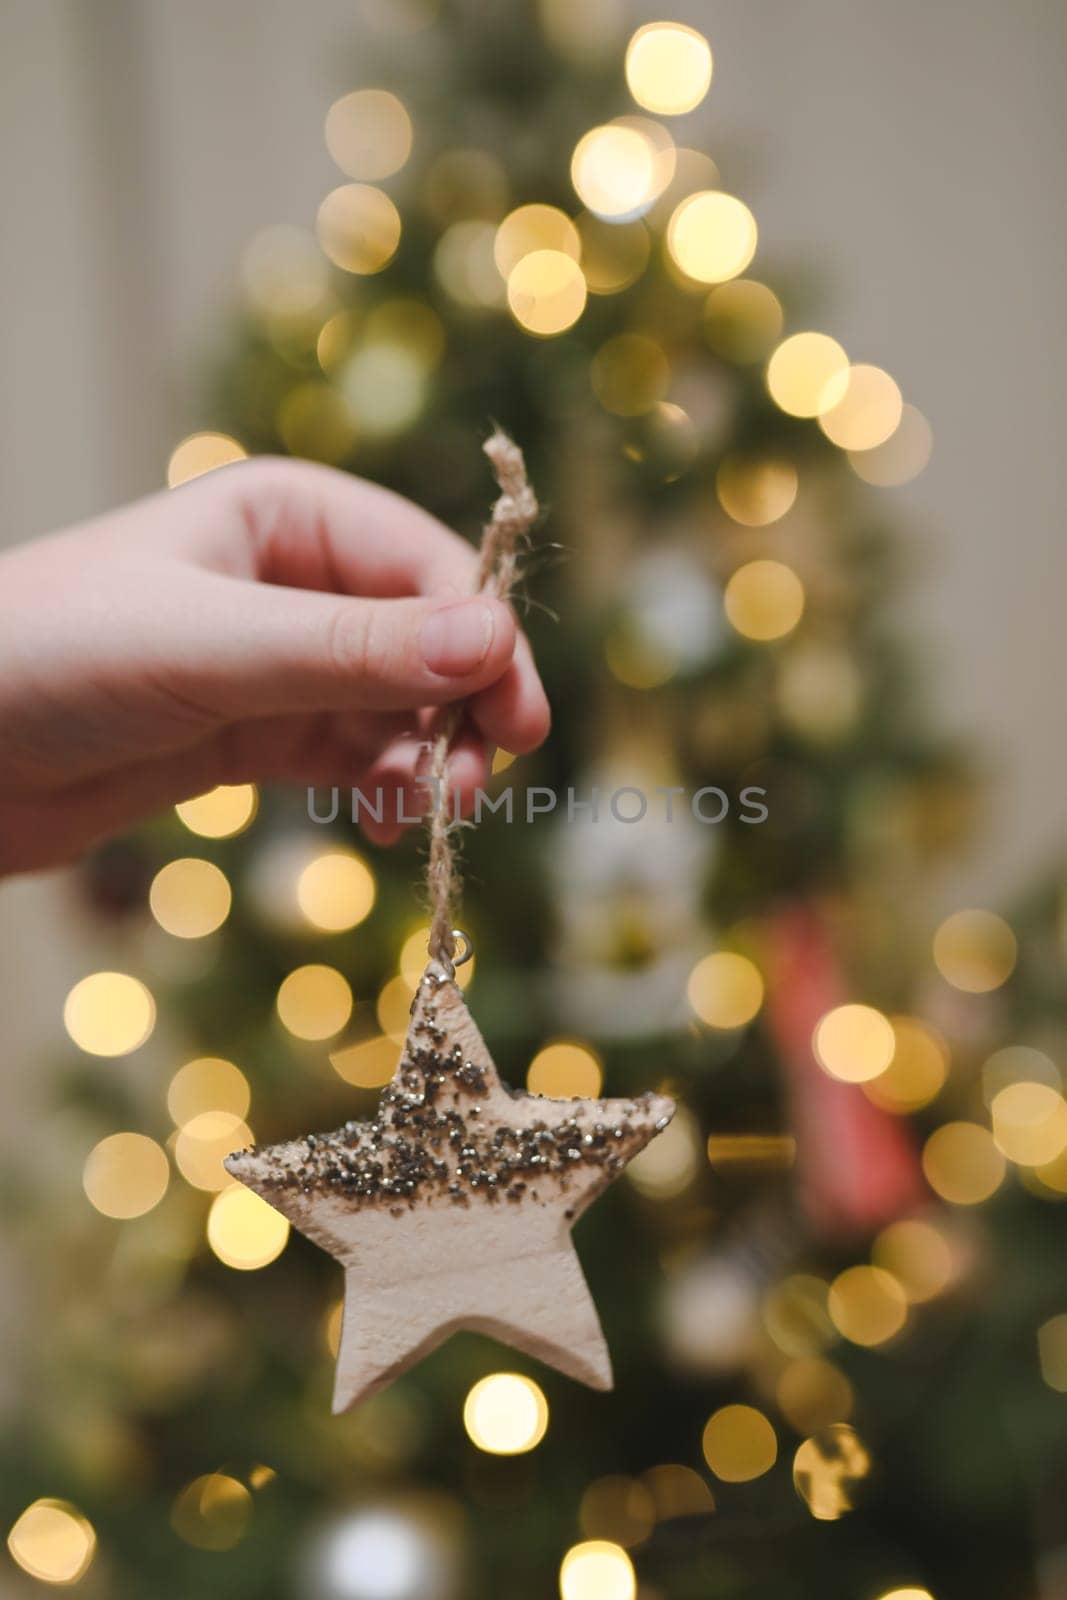 Decorating Christmas tree, holding Christmas toy in a hand. Holiday, Christmas and New Year family celebration concept by paralisart